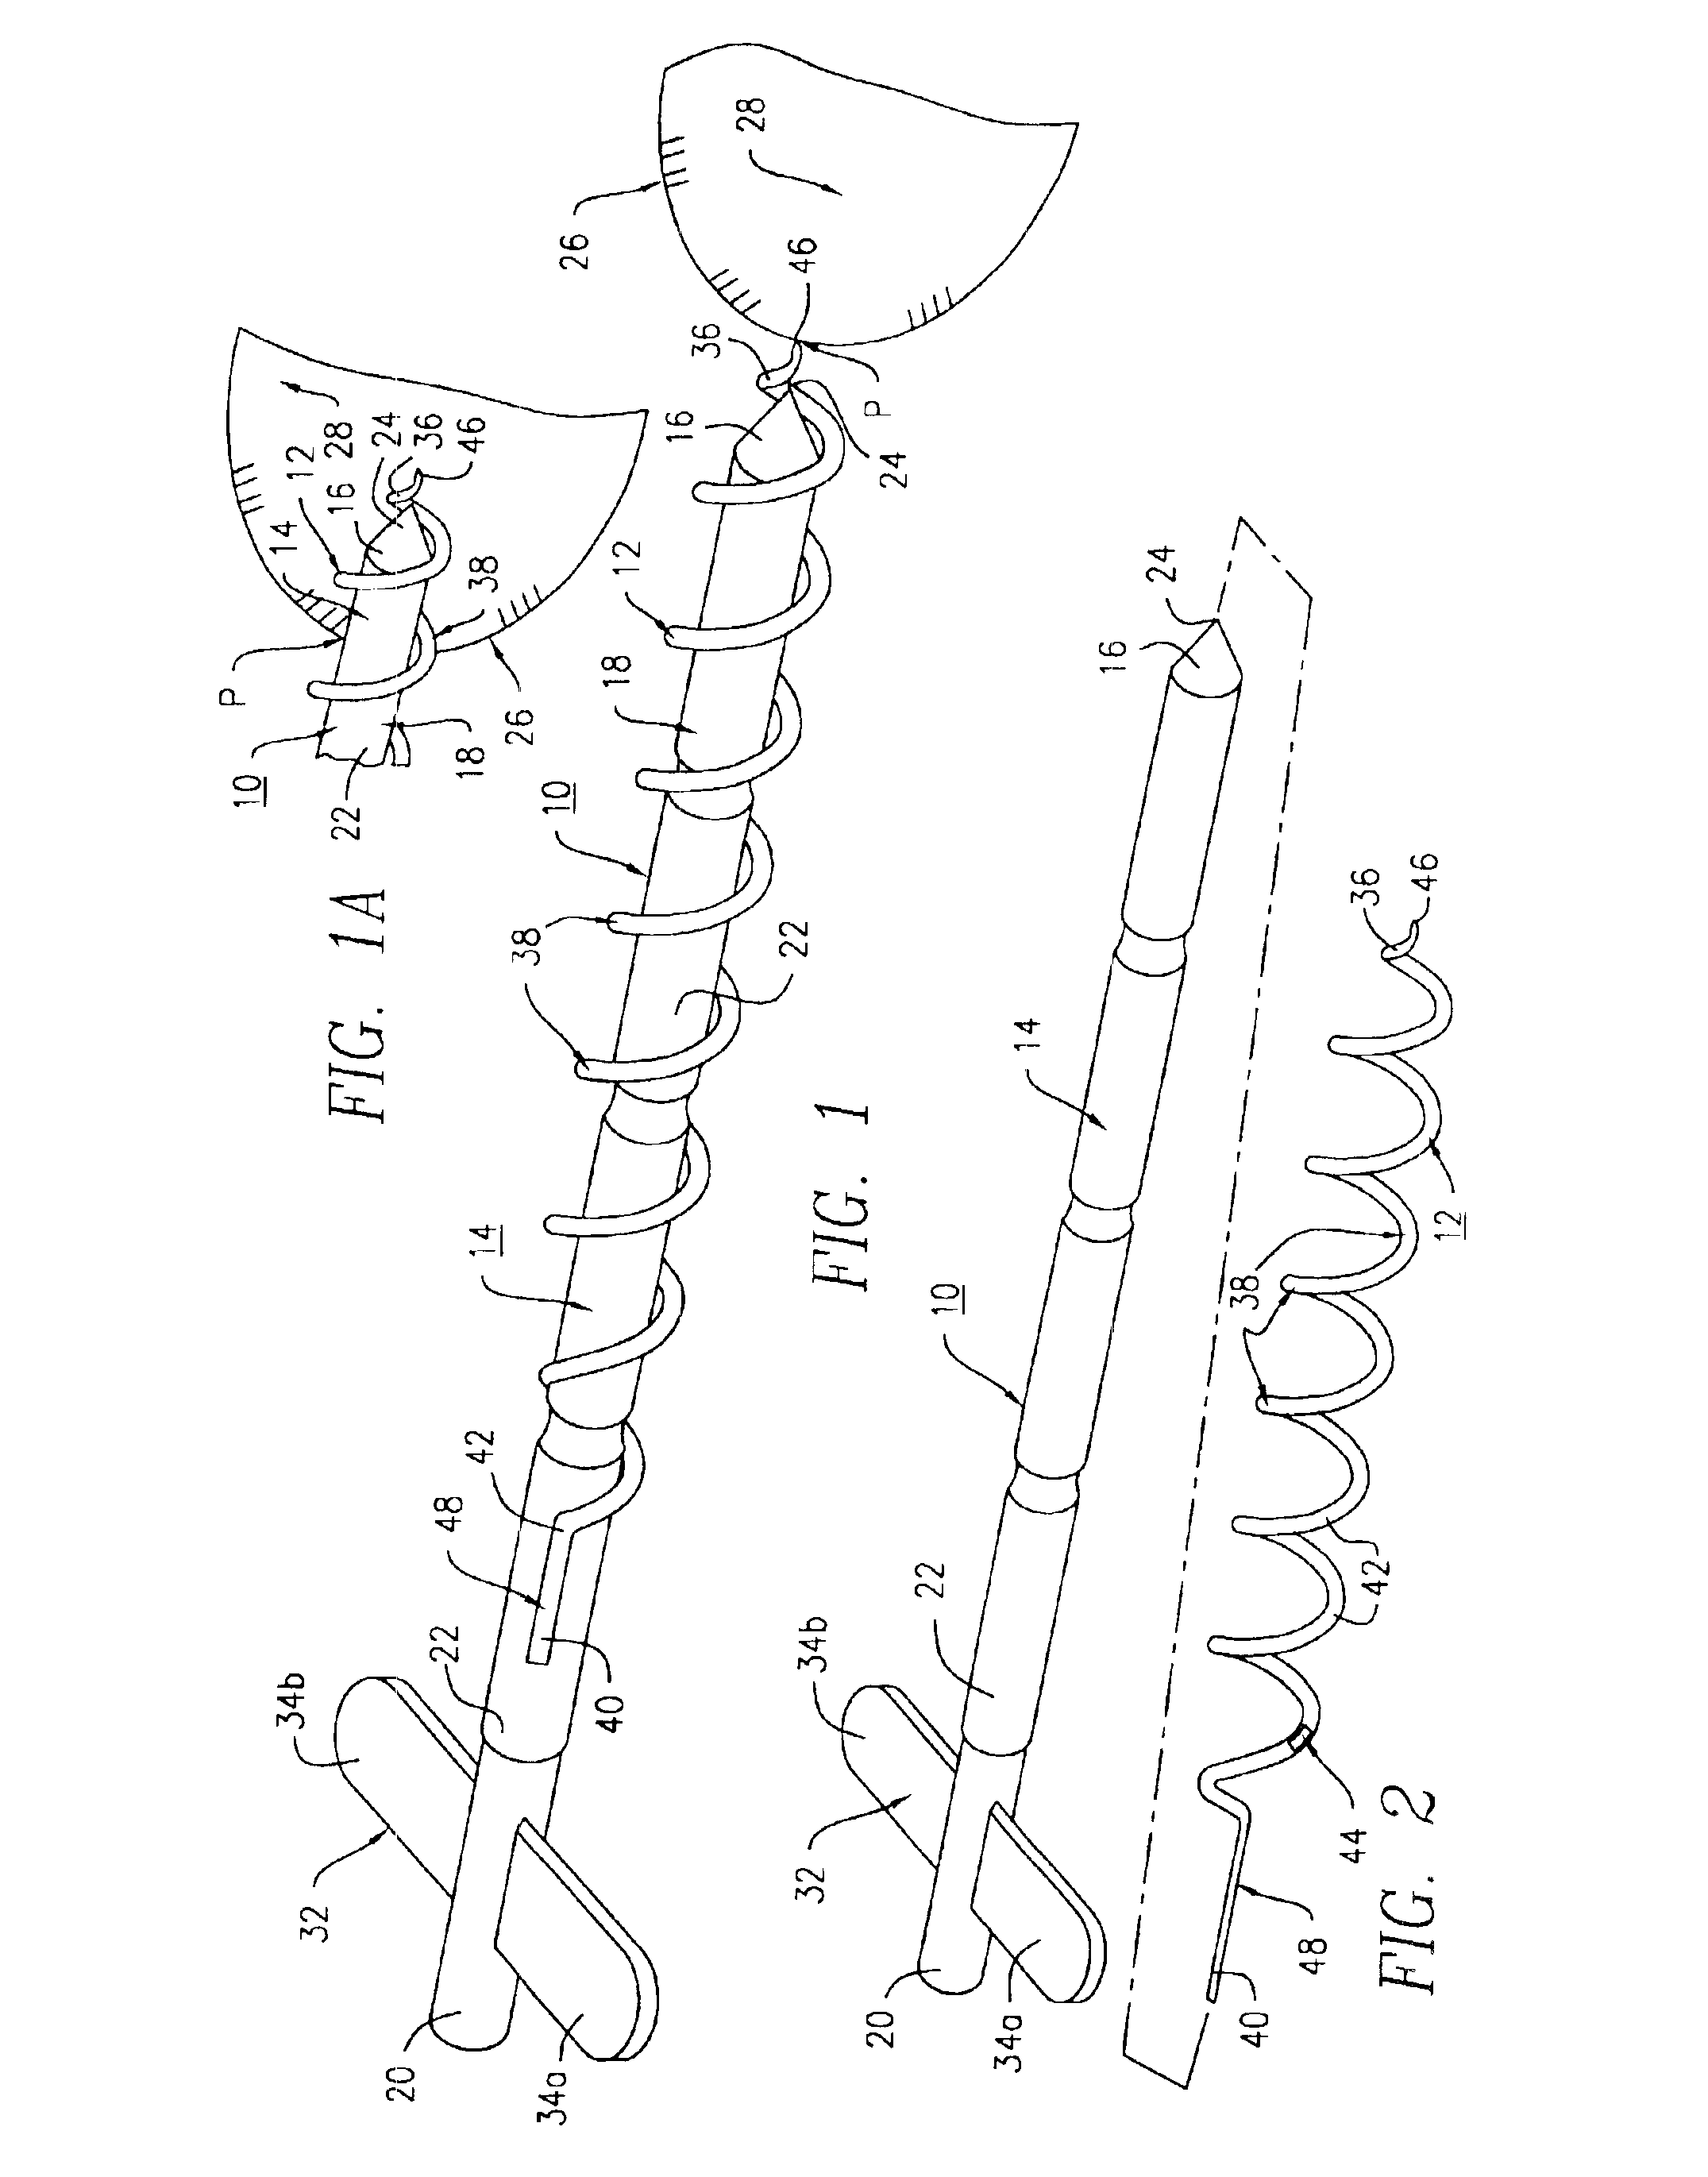 Helical device and method for aiding the ablation and assessment of tissue